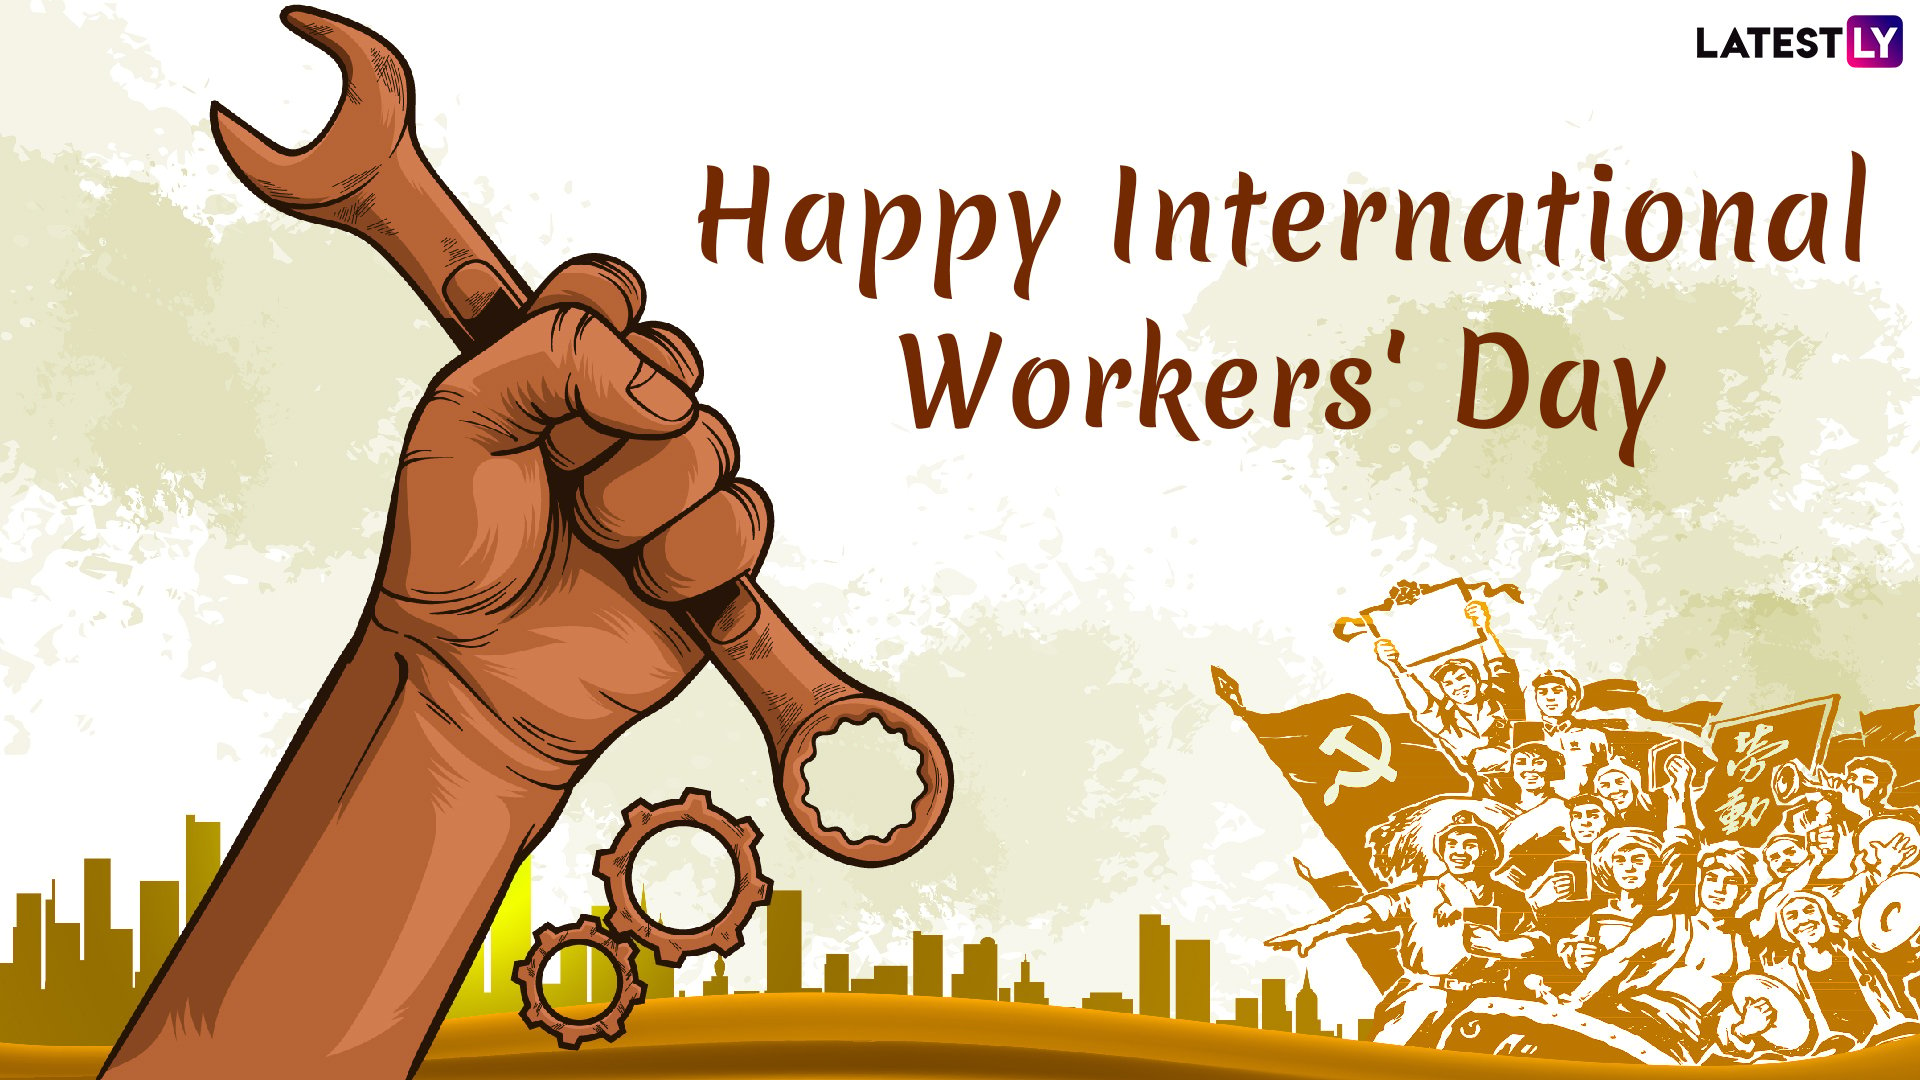 Workers Day Images - Free Download on Freepik